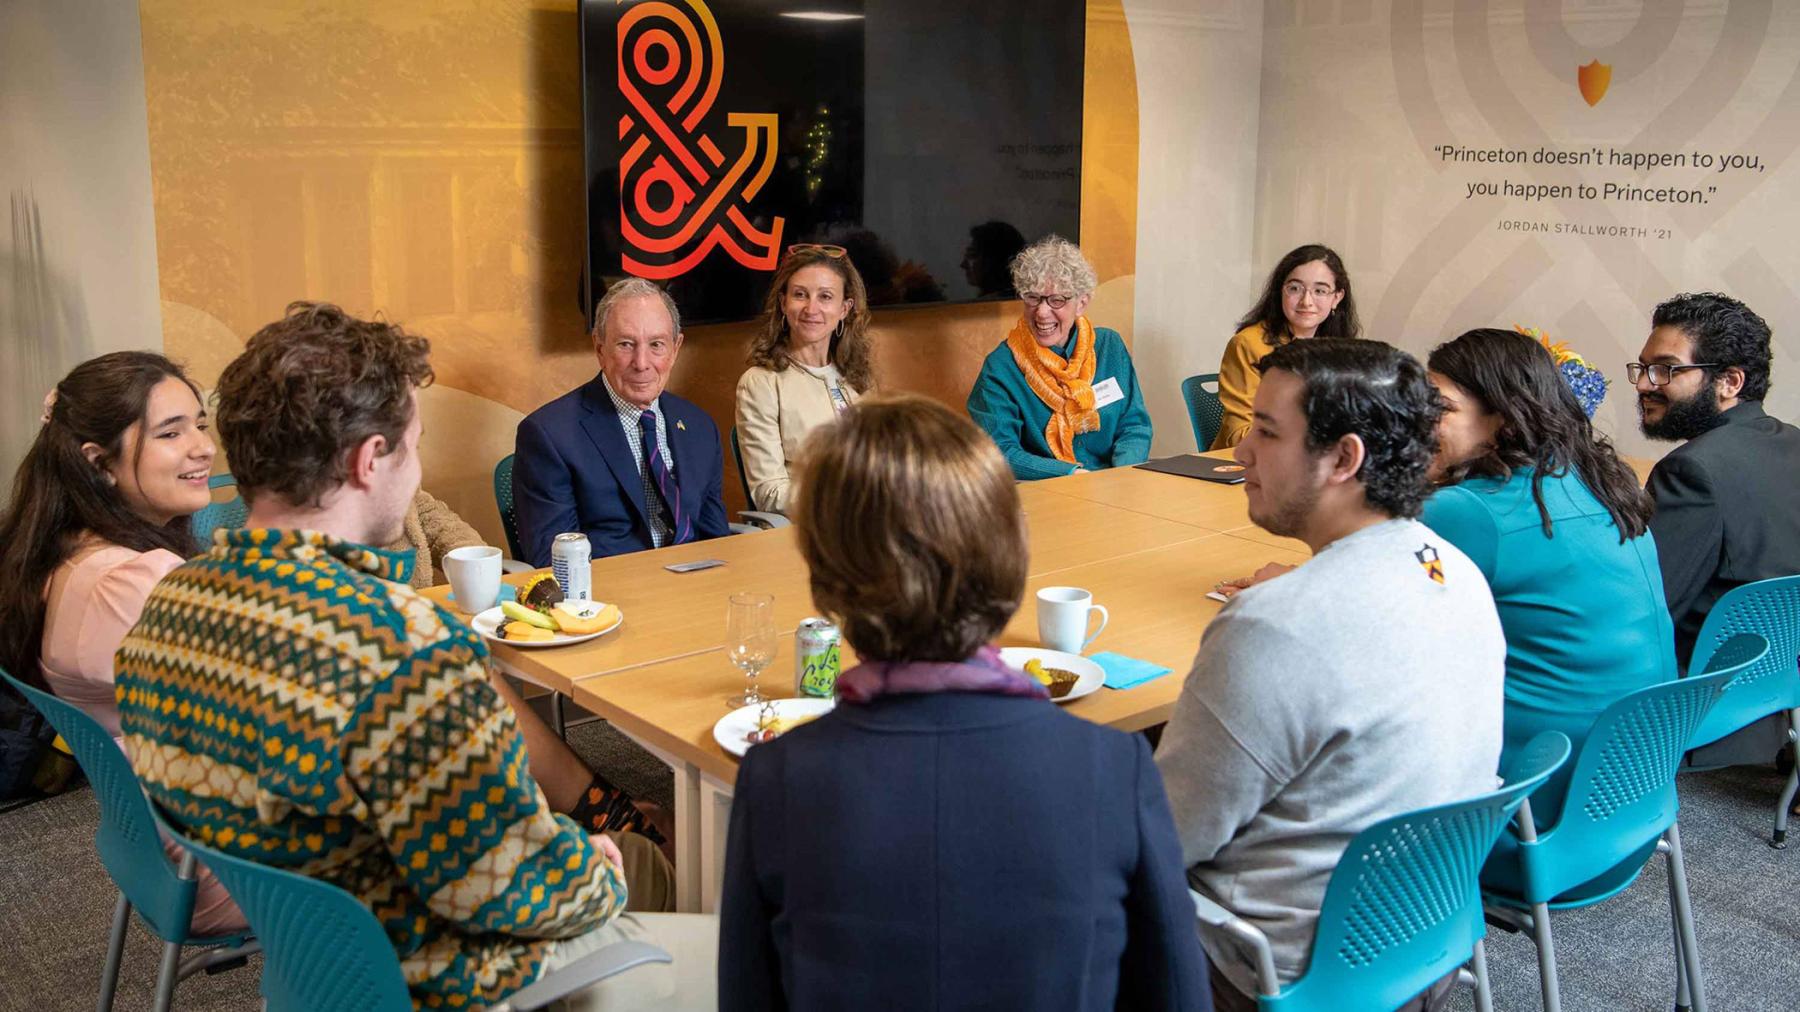 Michael R. Bloomberg and Emma Bloomberg (center) enjoy an informal roundtable conversation with a small group of students inside the center before the ceremony. Photo by Craig Warga